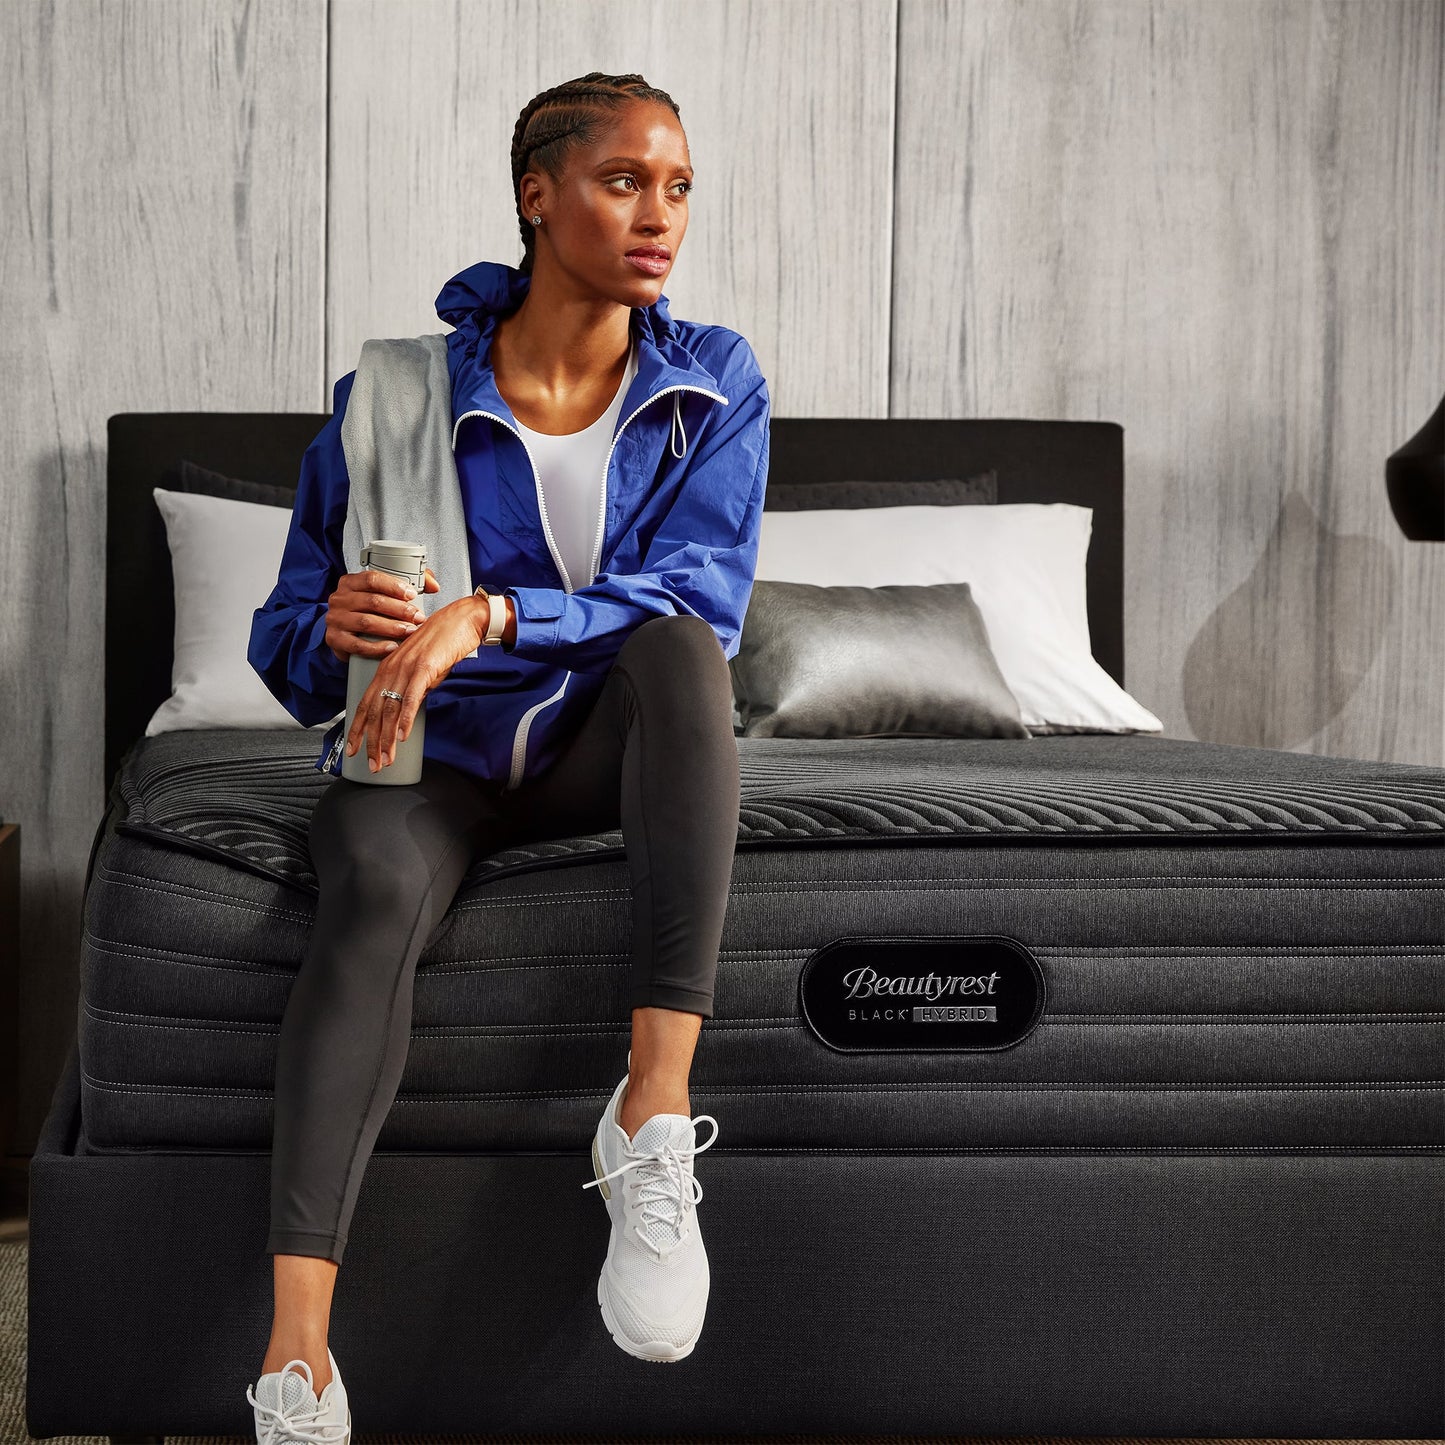 Woman With A Water Bottle And Sportswear Sitting On The Edge Of A Beautyrest Black Hybrid L-Class Firm Mattress